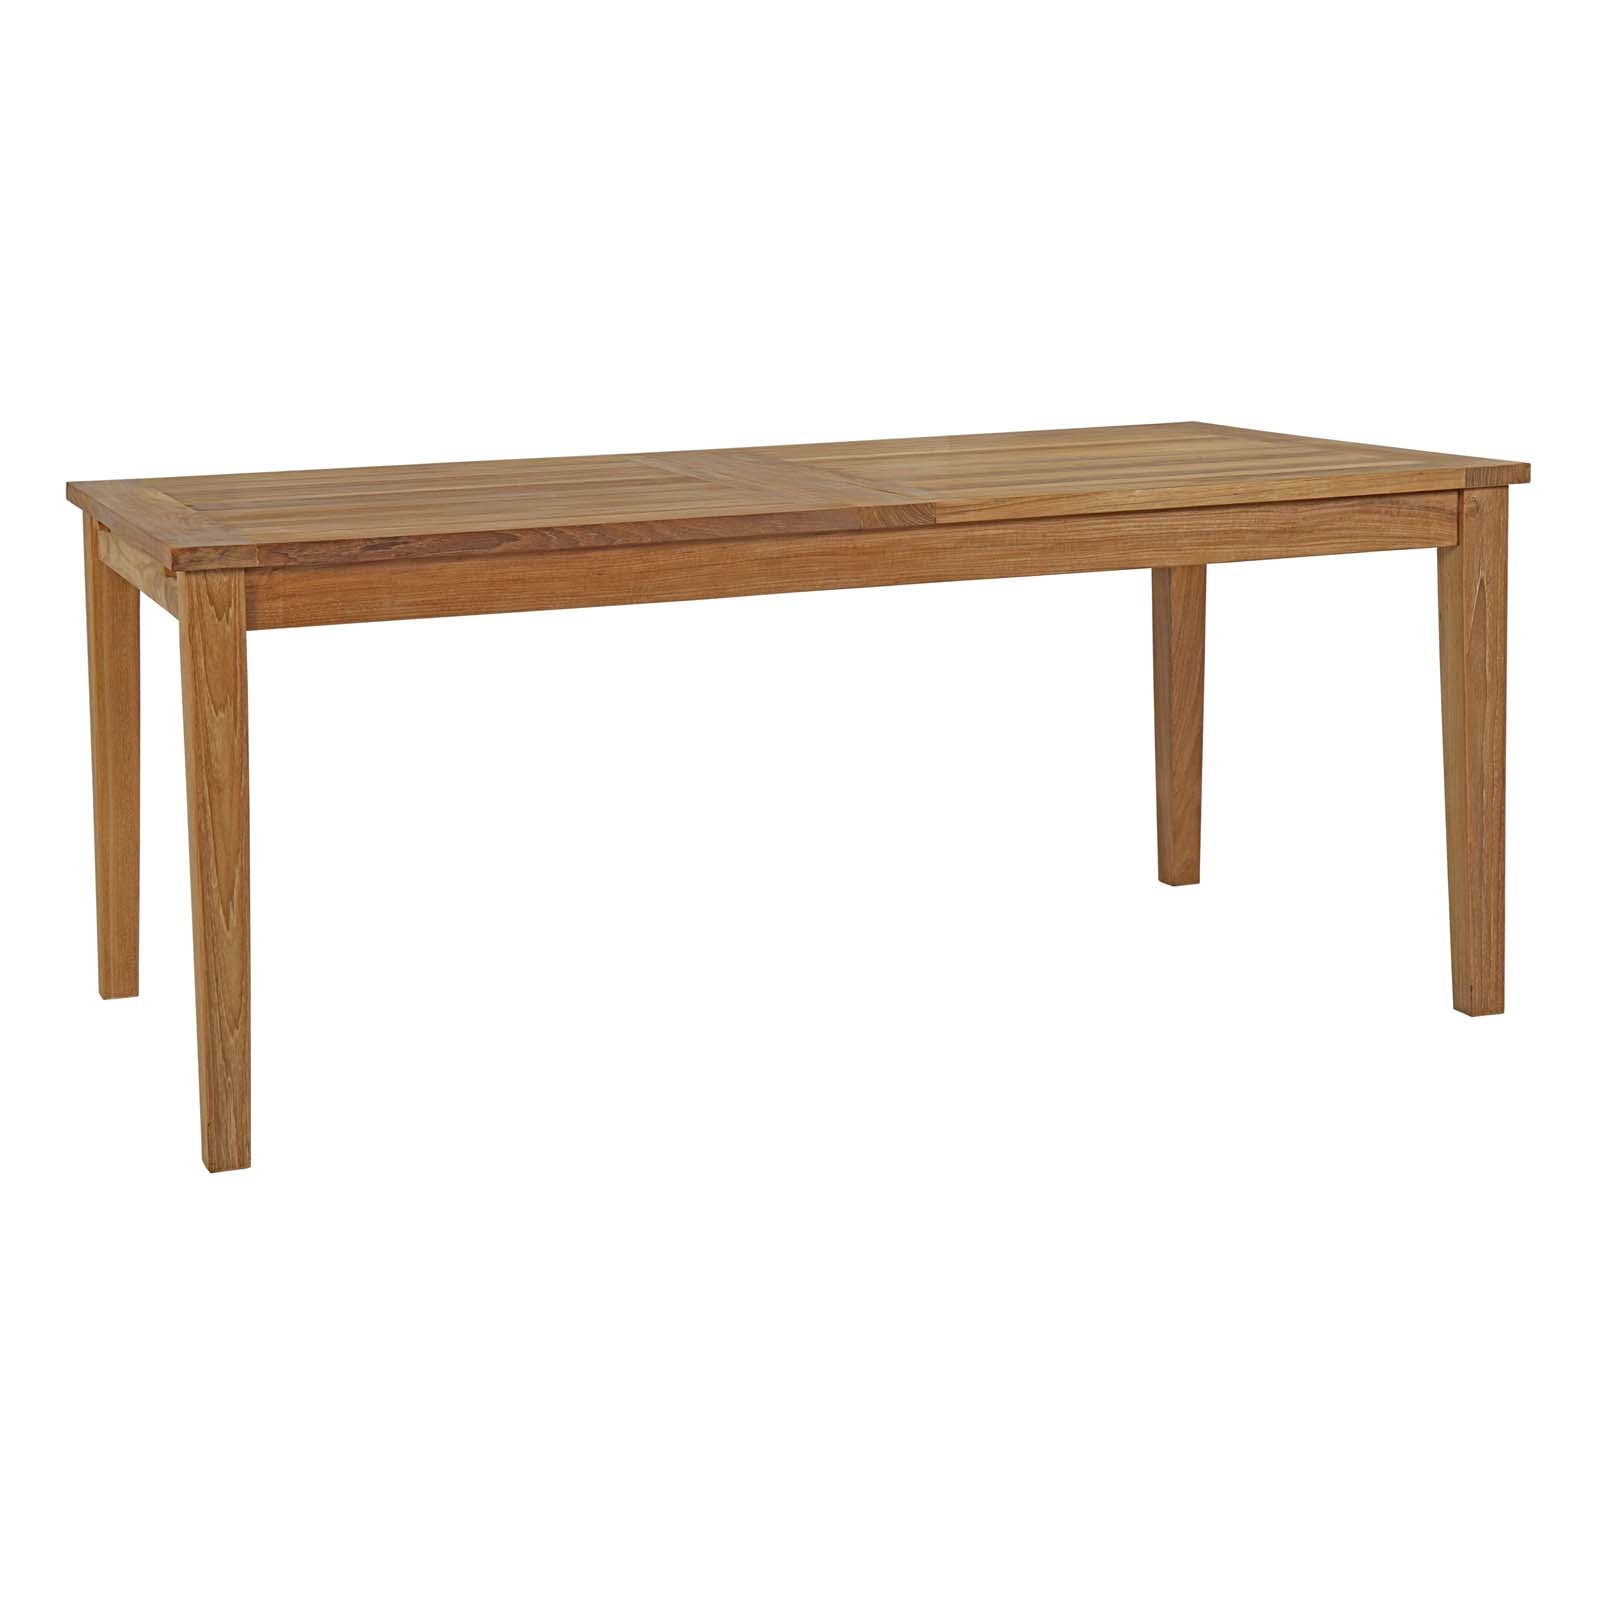 Marina Extendable Outdoor Patio Teak Dining Table - East Shore Modern Home Furnishings